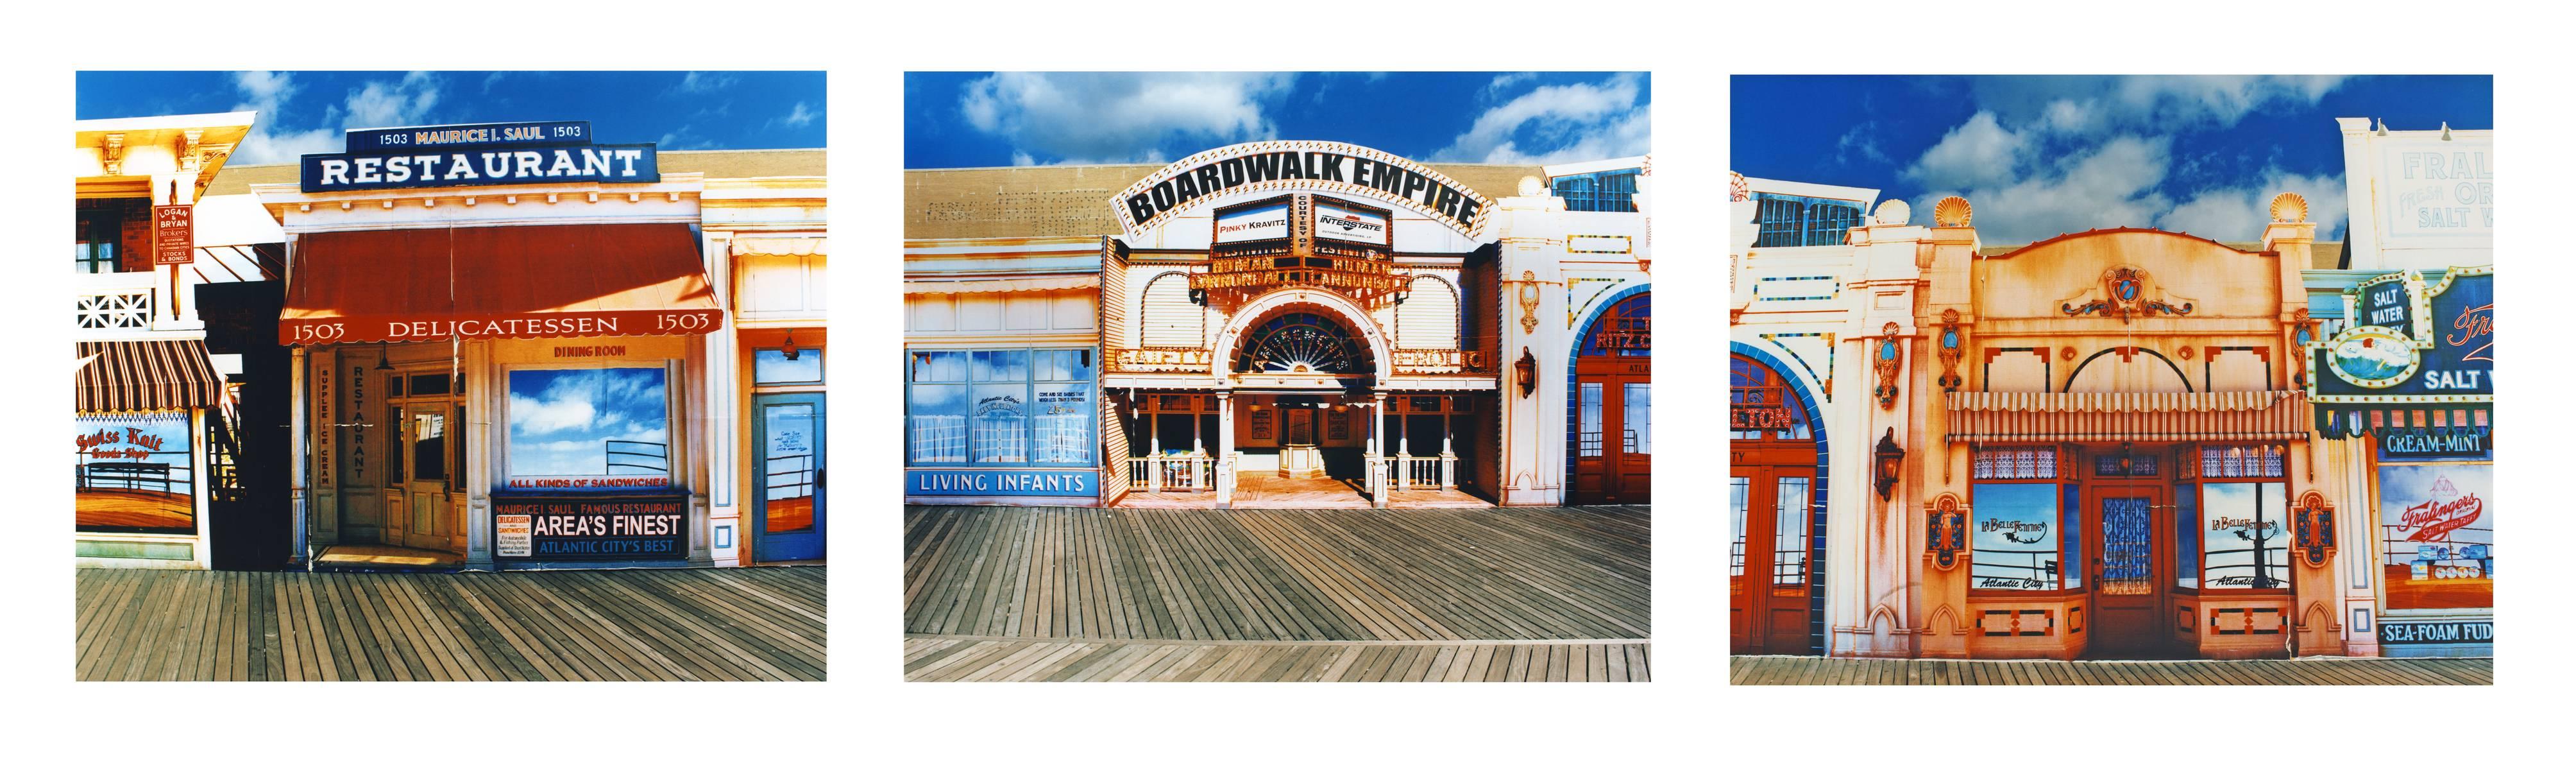 Boardwalk Empire in the Sun, Atlantic City, New Jersey - American Color Photo - Gray Print by Richard Heeps